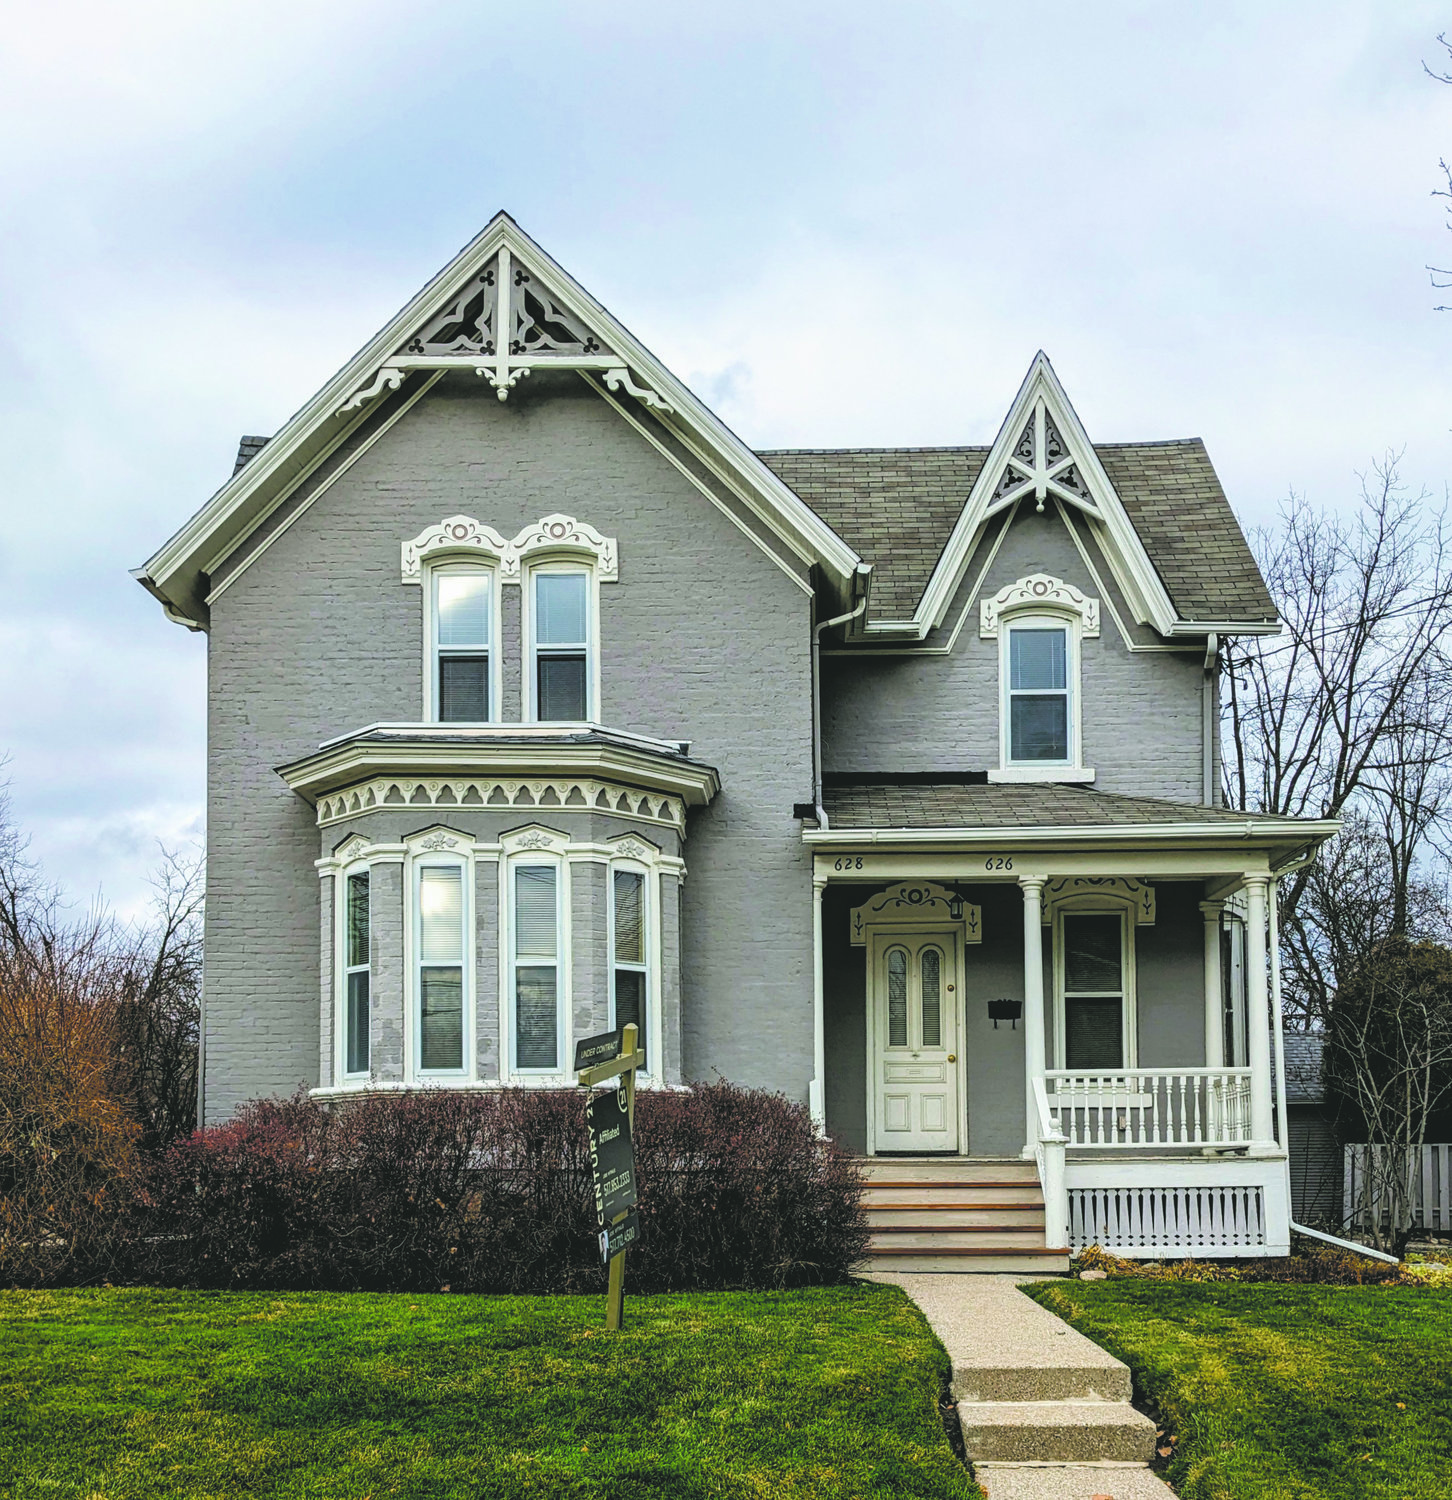 Built in 1878, this stately, 3,000-square-foot home sits on the corner of Sycamore and Ionia streets, near the edge of the original city limits of Lansing.